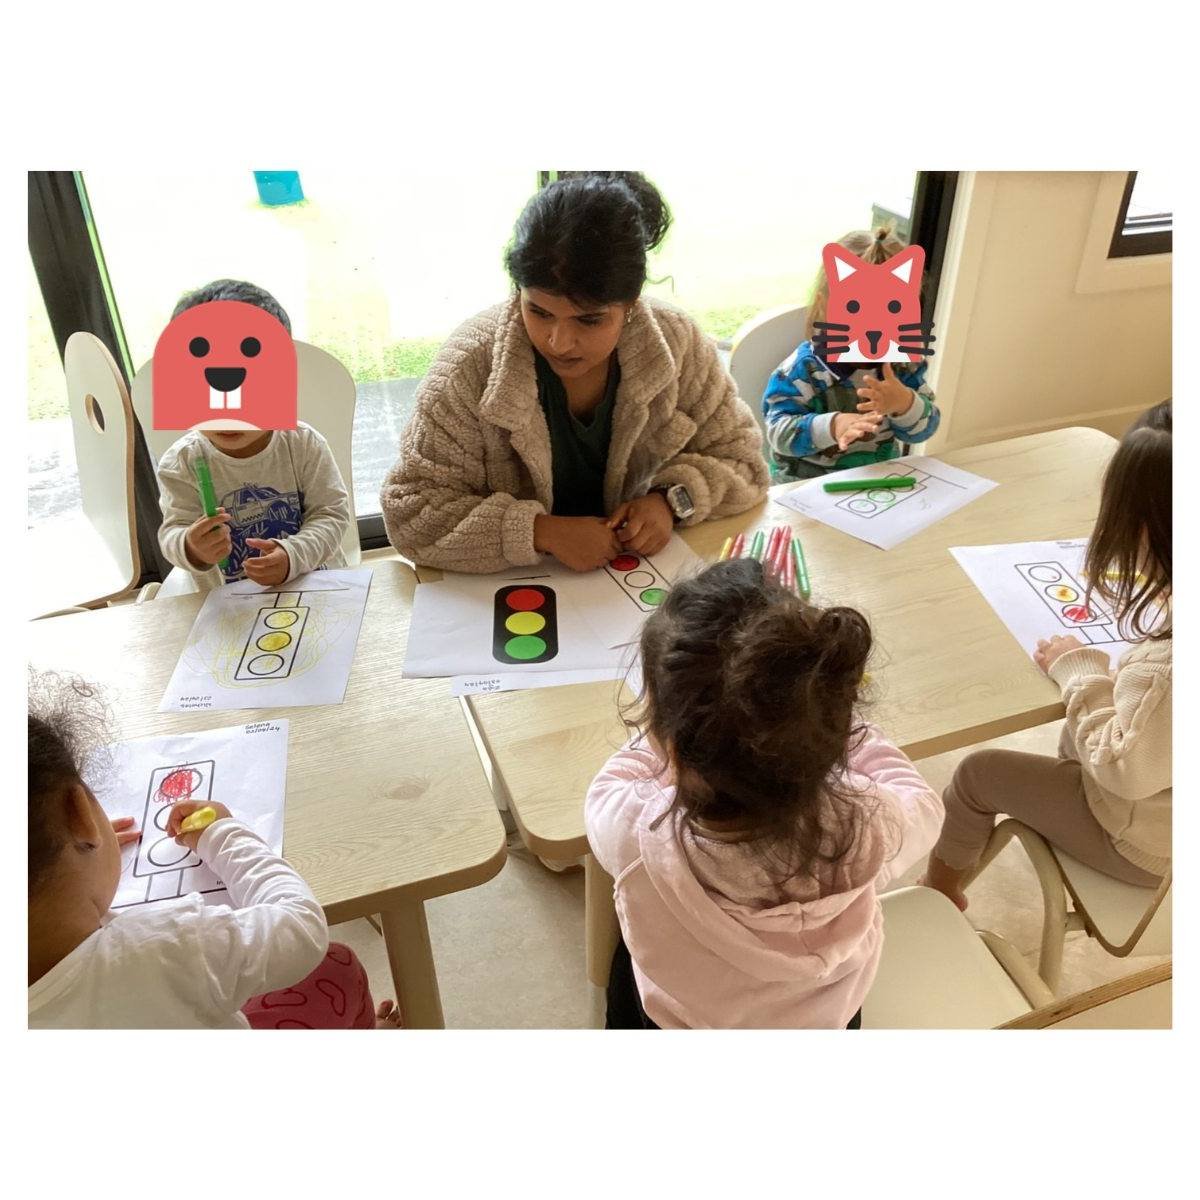 🚦 Traffic Light Fun 🚦

Our little tiny explorers learners explored traffic lights: 🟢 Go, 🟡 Slow Down, 🔴 Stop! They also participated in coloring with textures, honing their pen-holding and grasping skills. It was a playful blend of learning and 